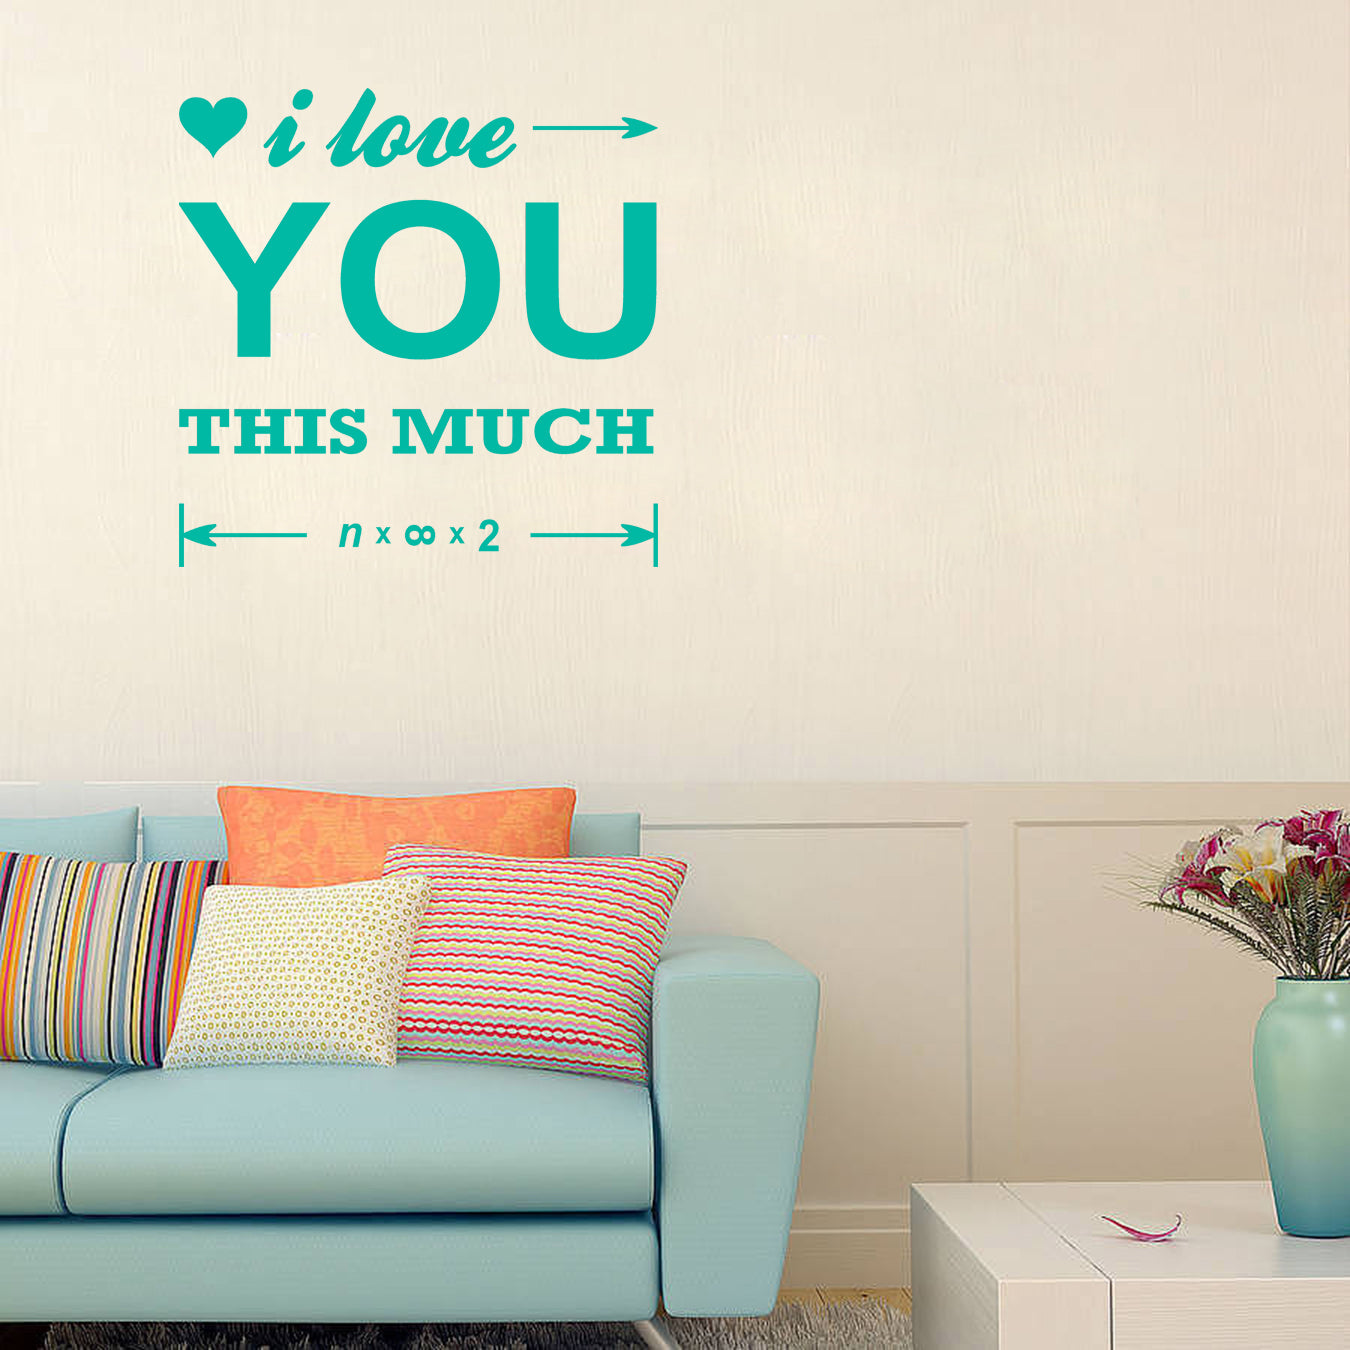 I love you this much | Wall quote - Adnil Creations